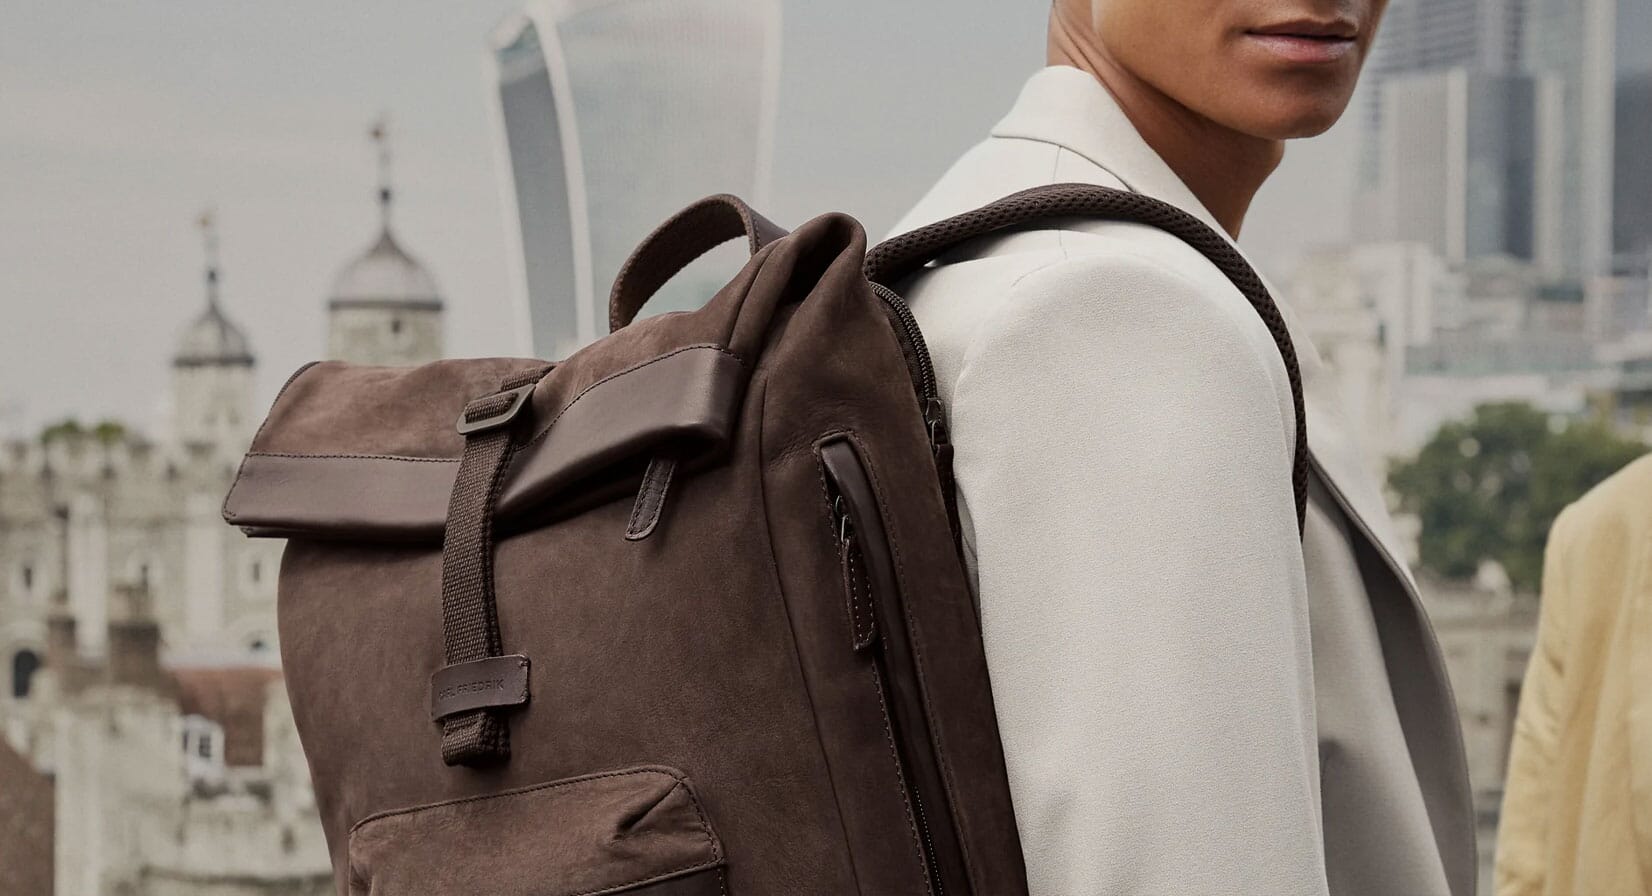 The Ultimate Leather Backpack and More of This Week's Best